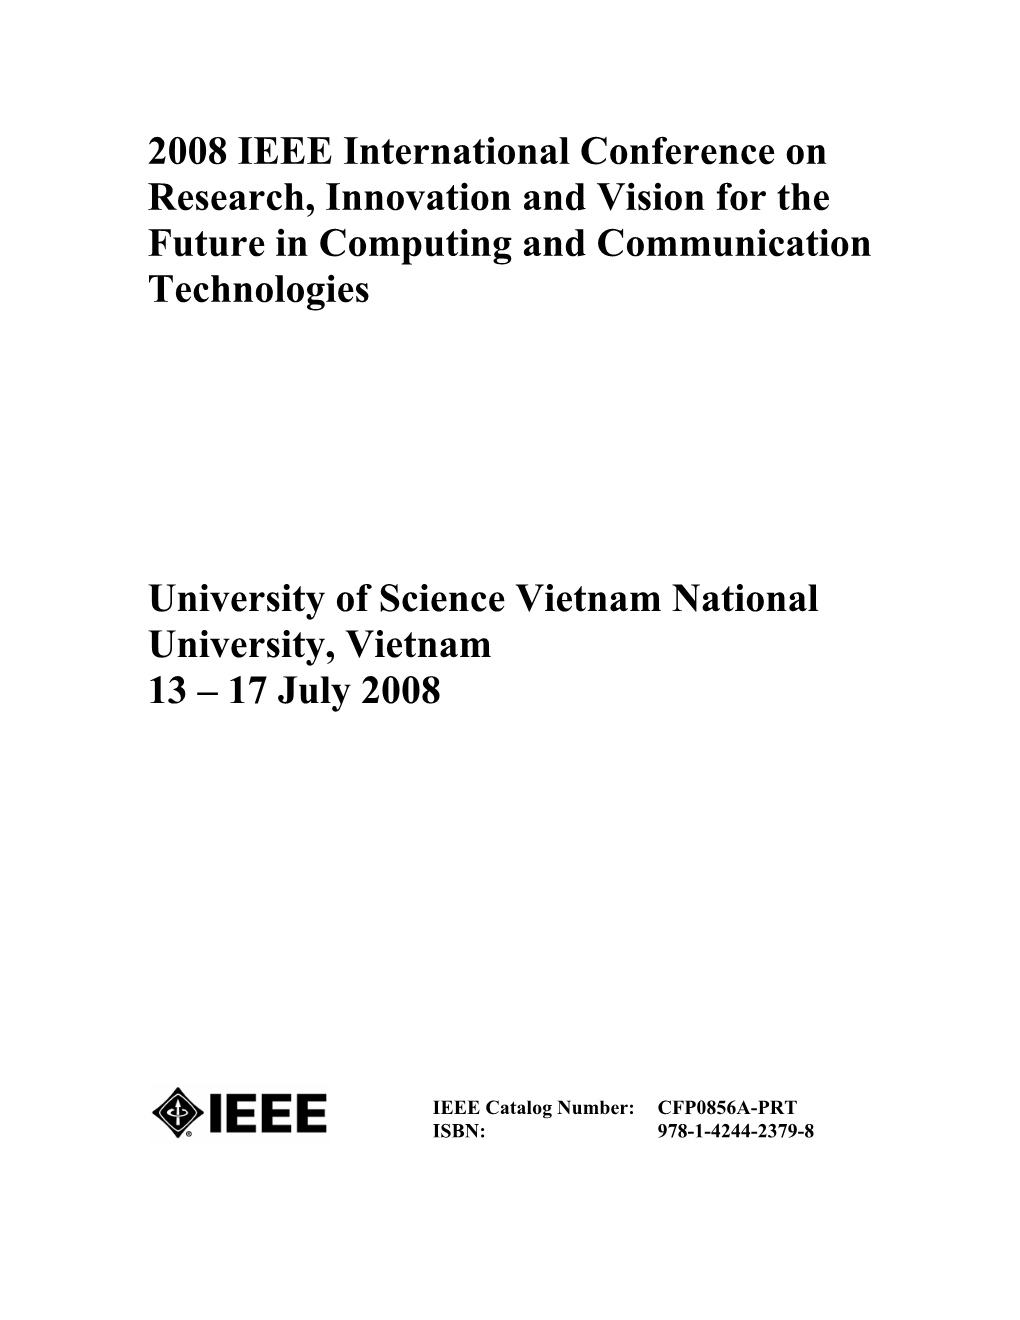 2008 IEEE International Conference on Research, Innovation and Vision for the Future in Computing and Communication Technologies